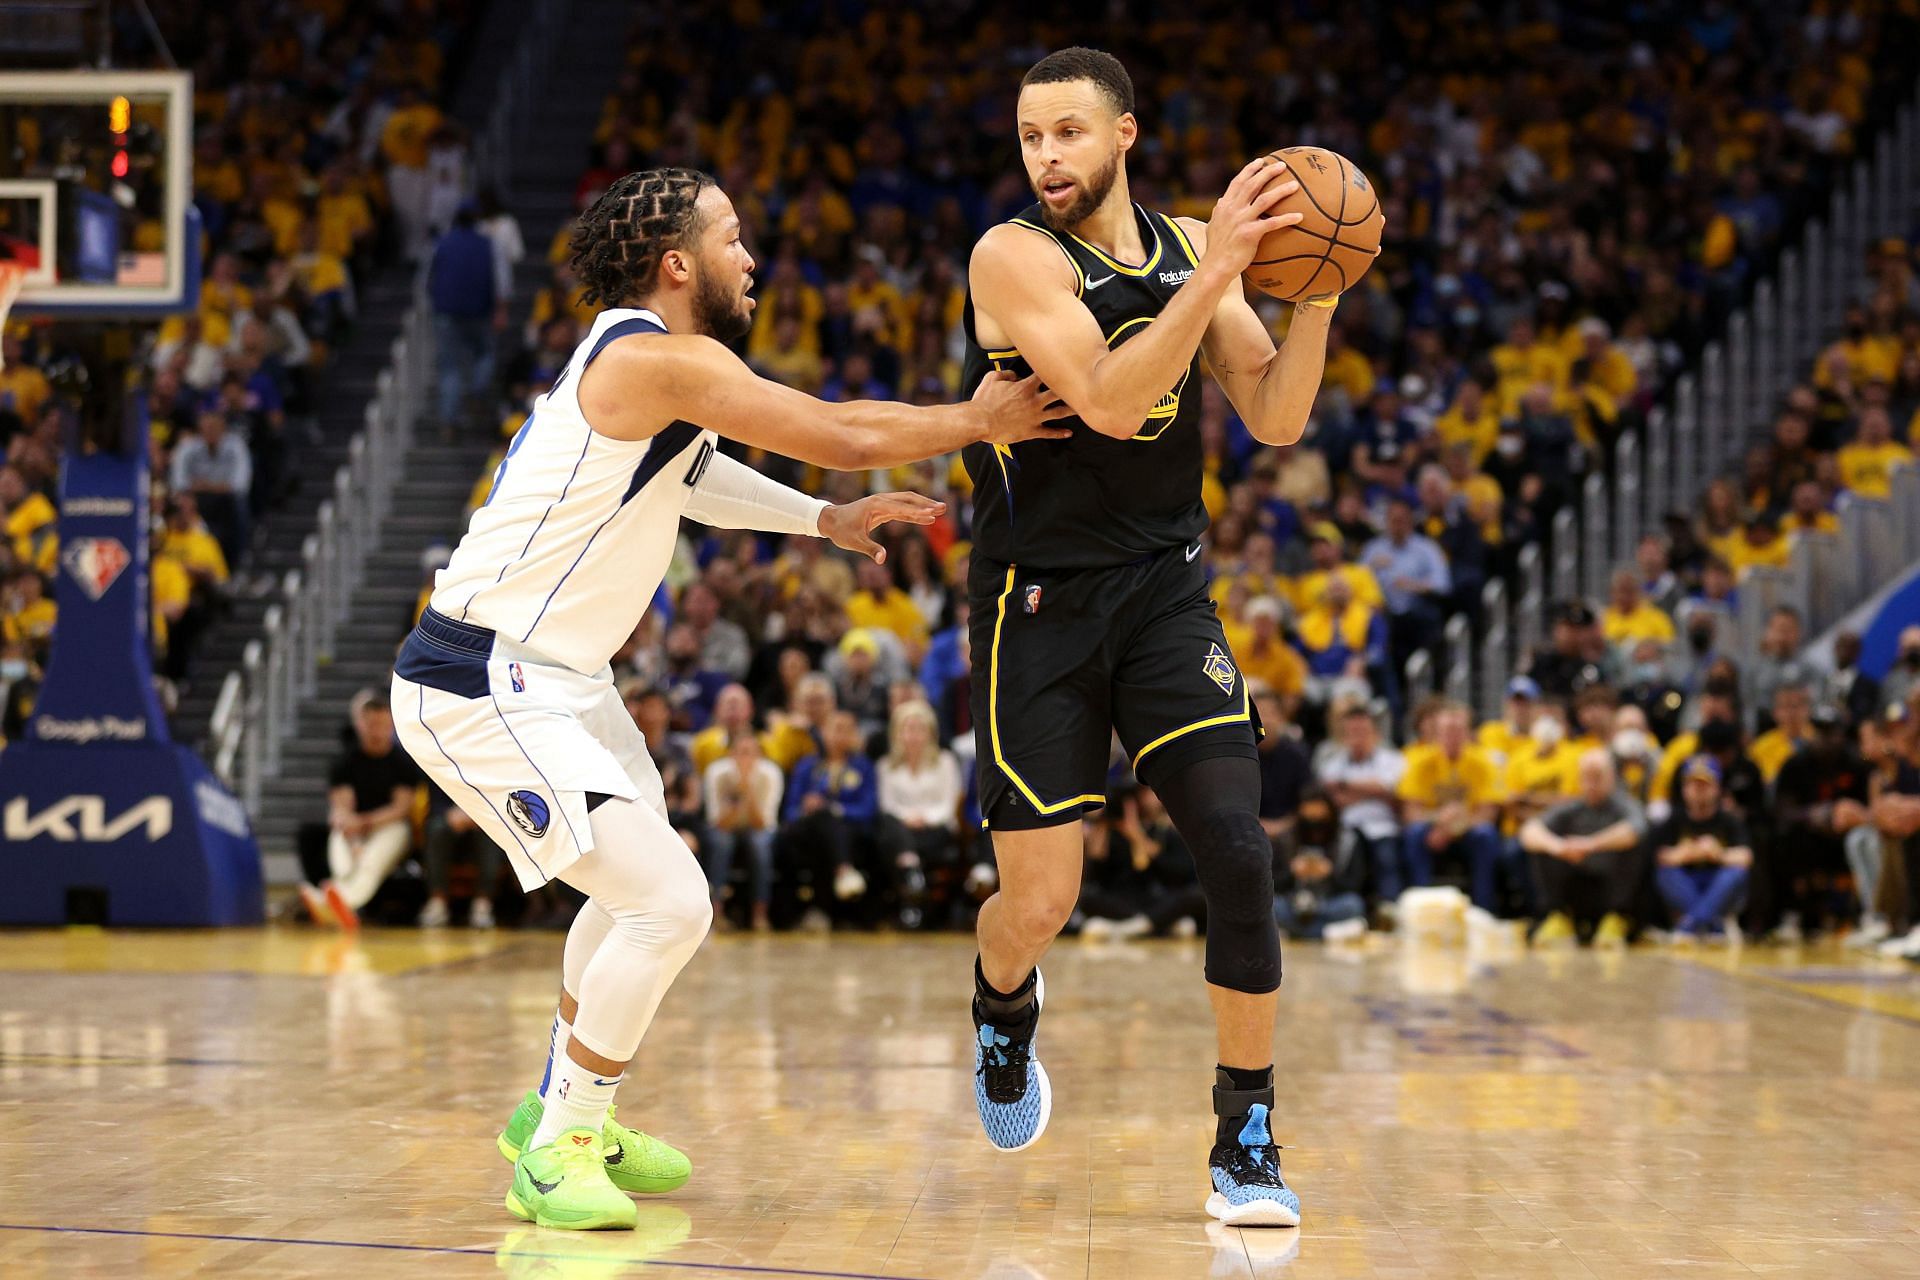 Steph Curry of the Golden State Warriors handles the ball against Jalen Brunson of the Dallas Mavericks during Game 5 of the Western Conference finals on Thursday in San Francisco, California.